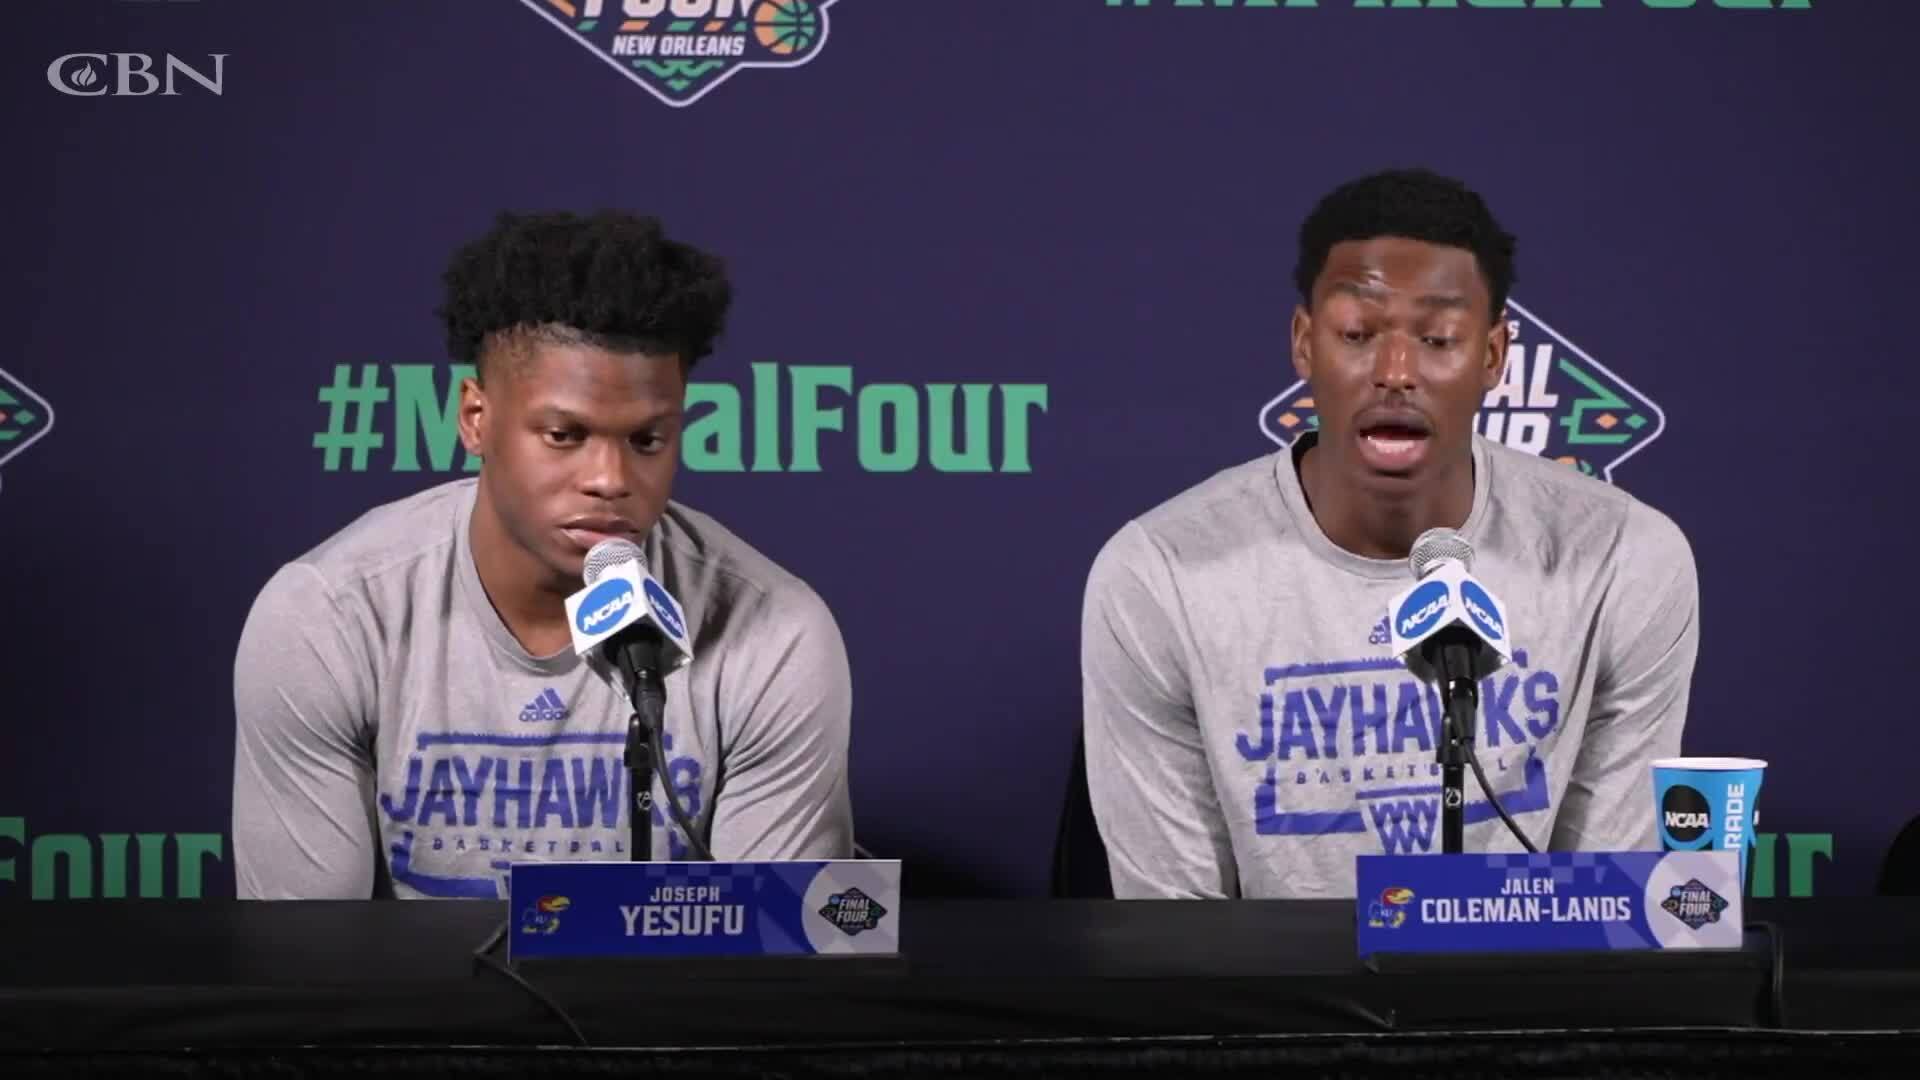 UNC and Kansas Players Talk About their Faith Jesus Christ Ahead of NCAA Championship